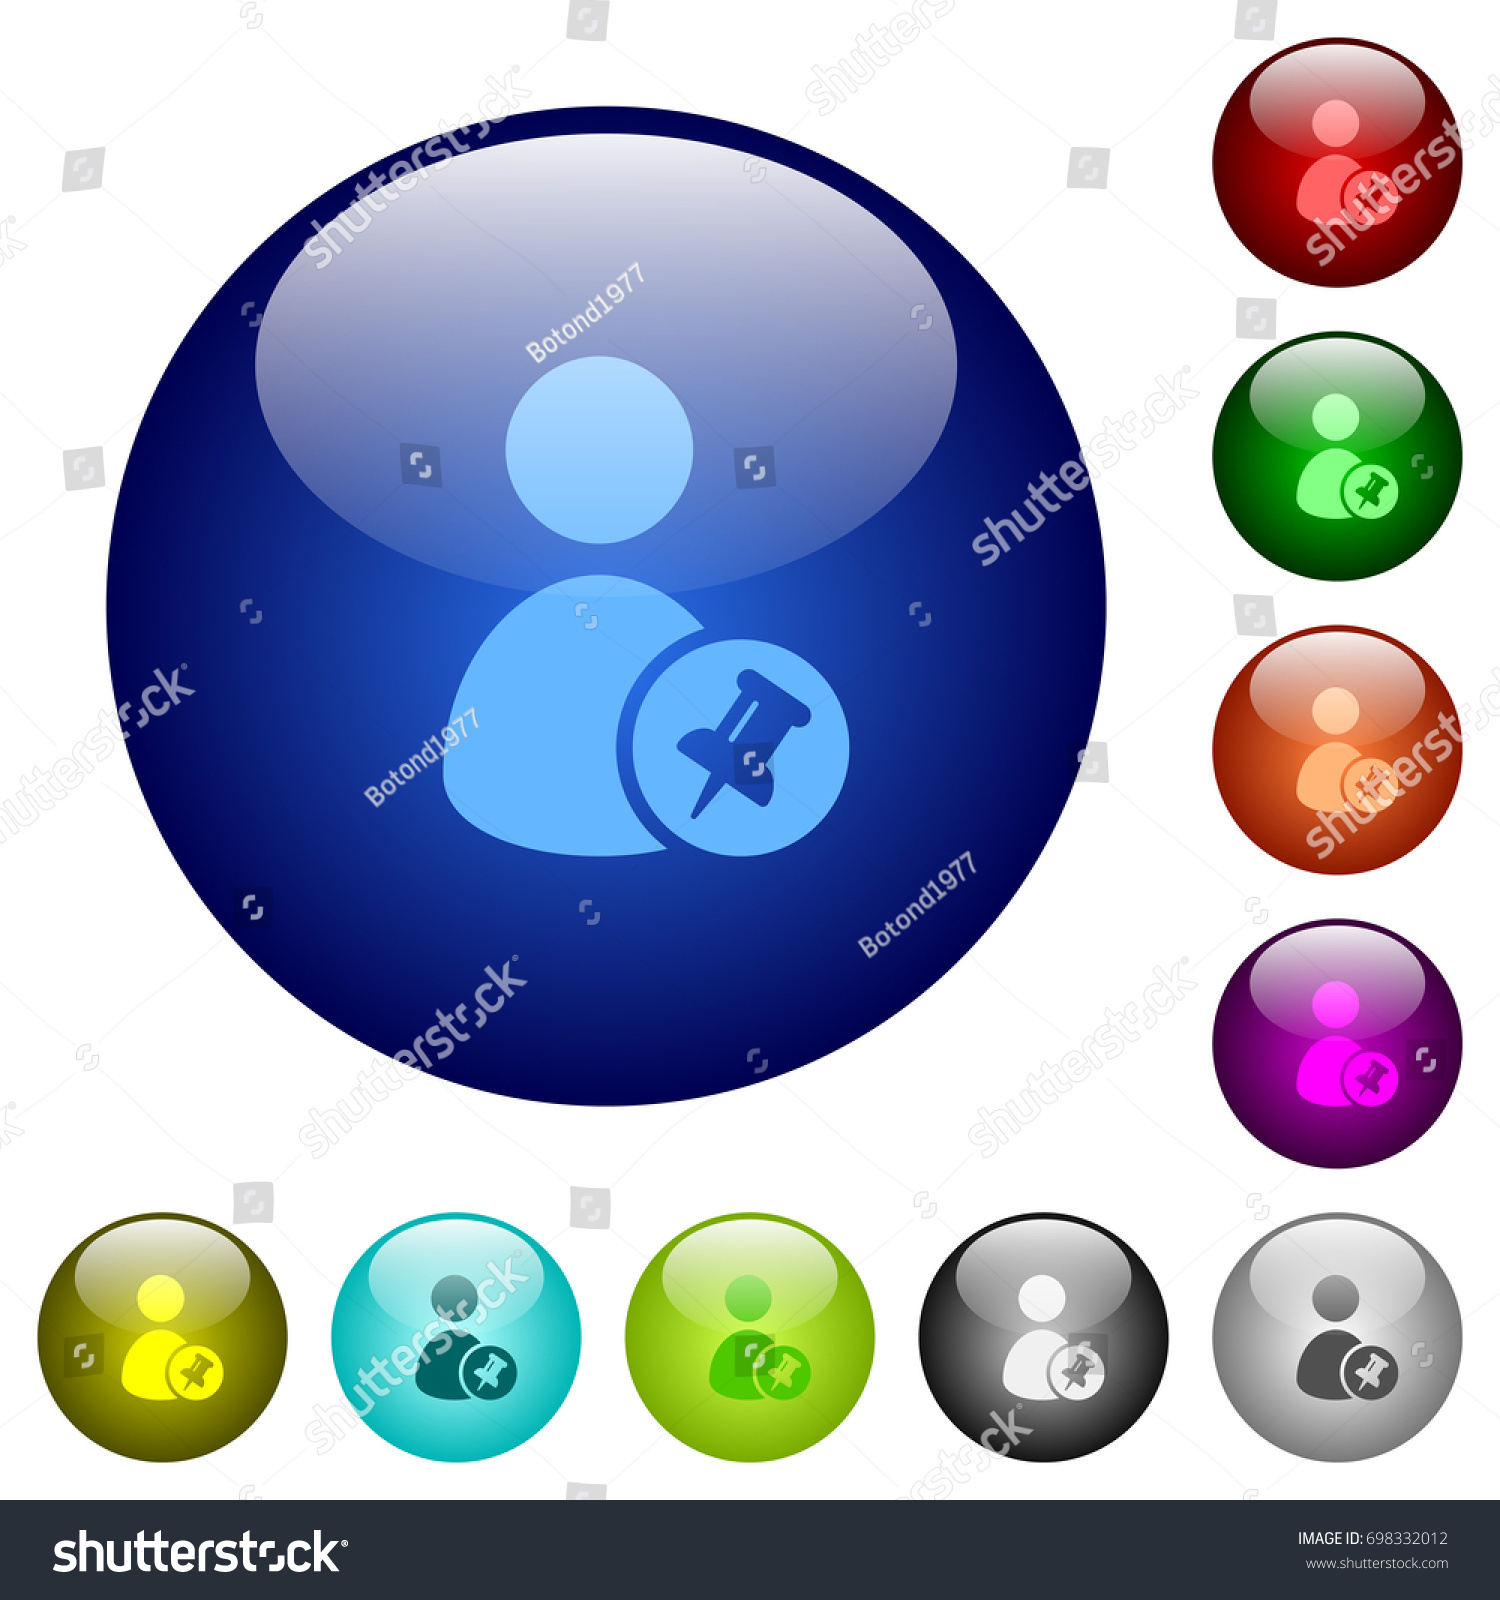 Pin user account icons on round color glass buttons #698332012